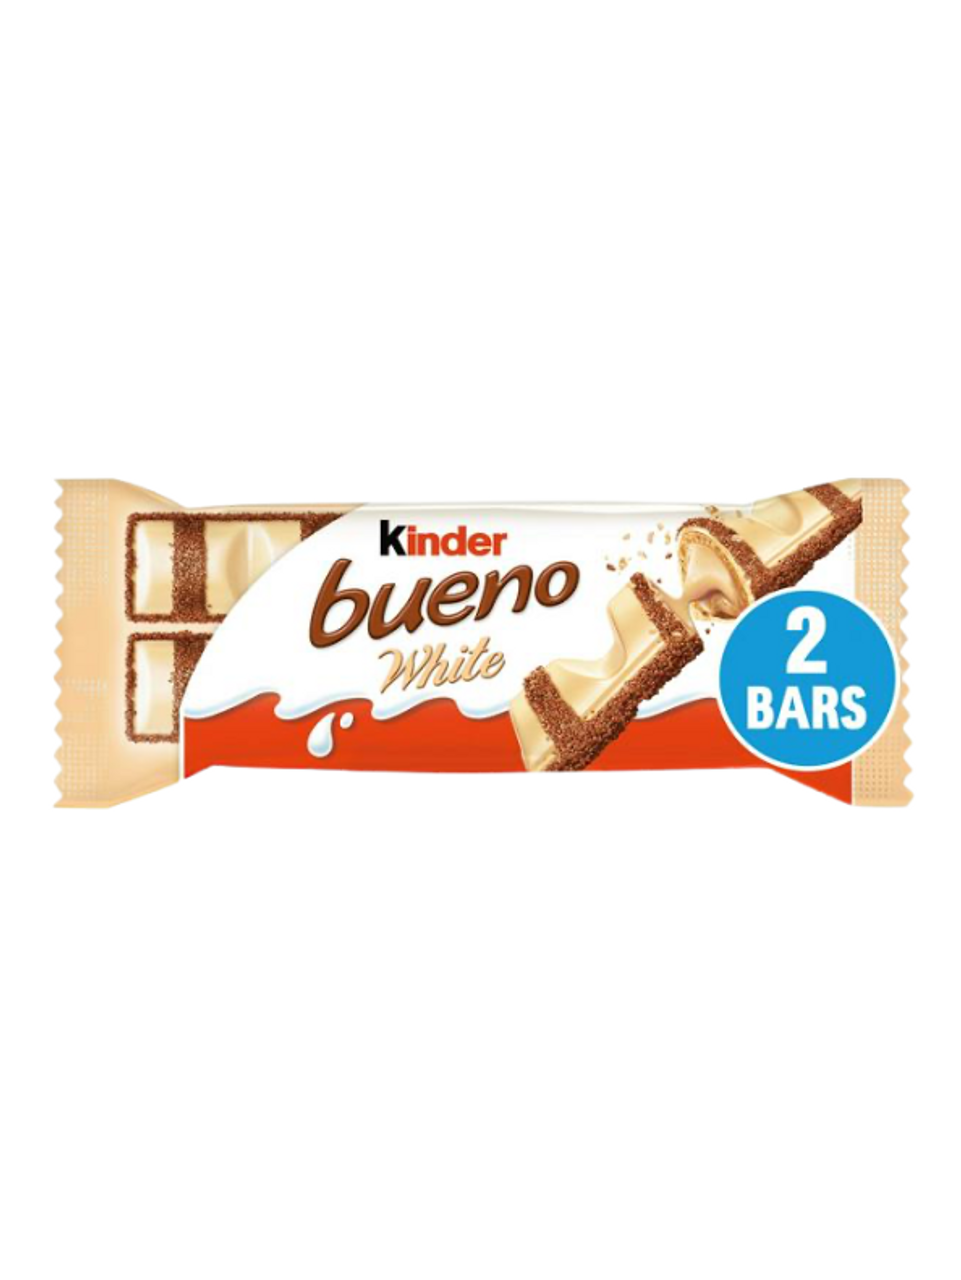 Kinder Bueno Chocolate Wafer - 43g - Pack of 3 (43g x 3 Bars)